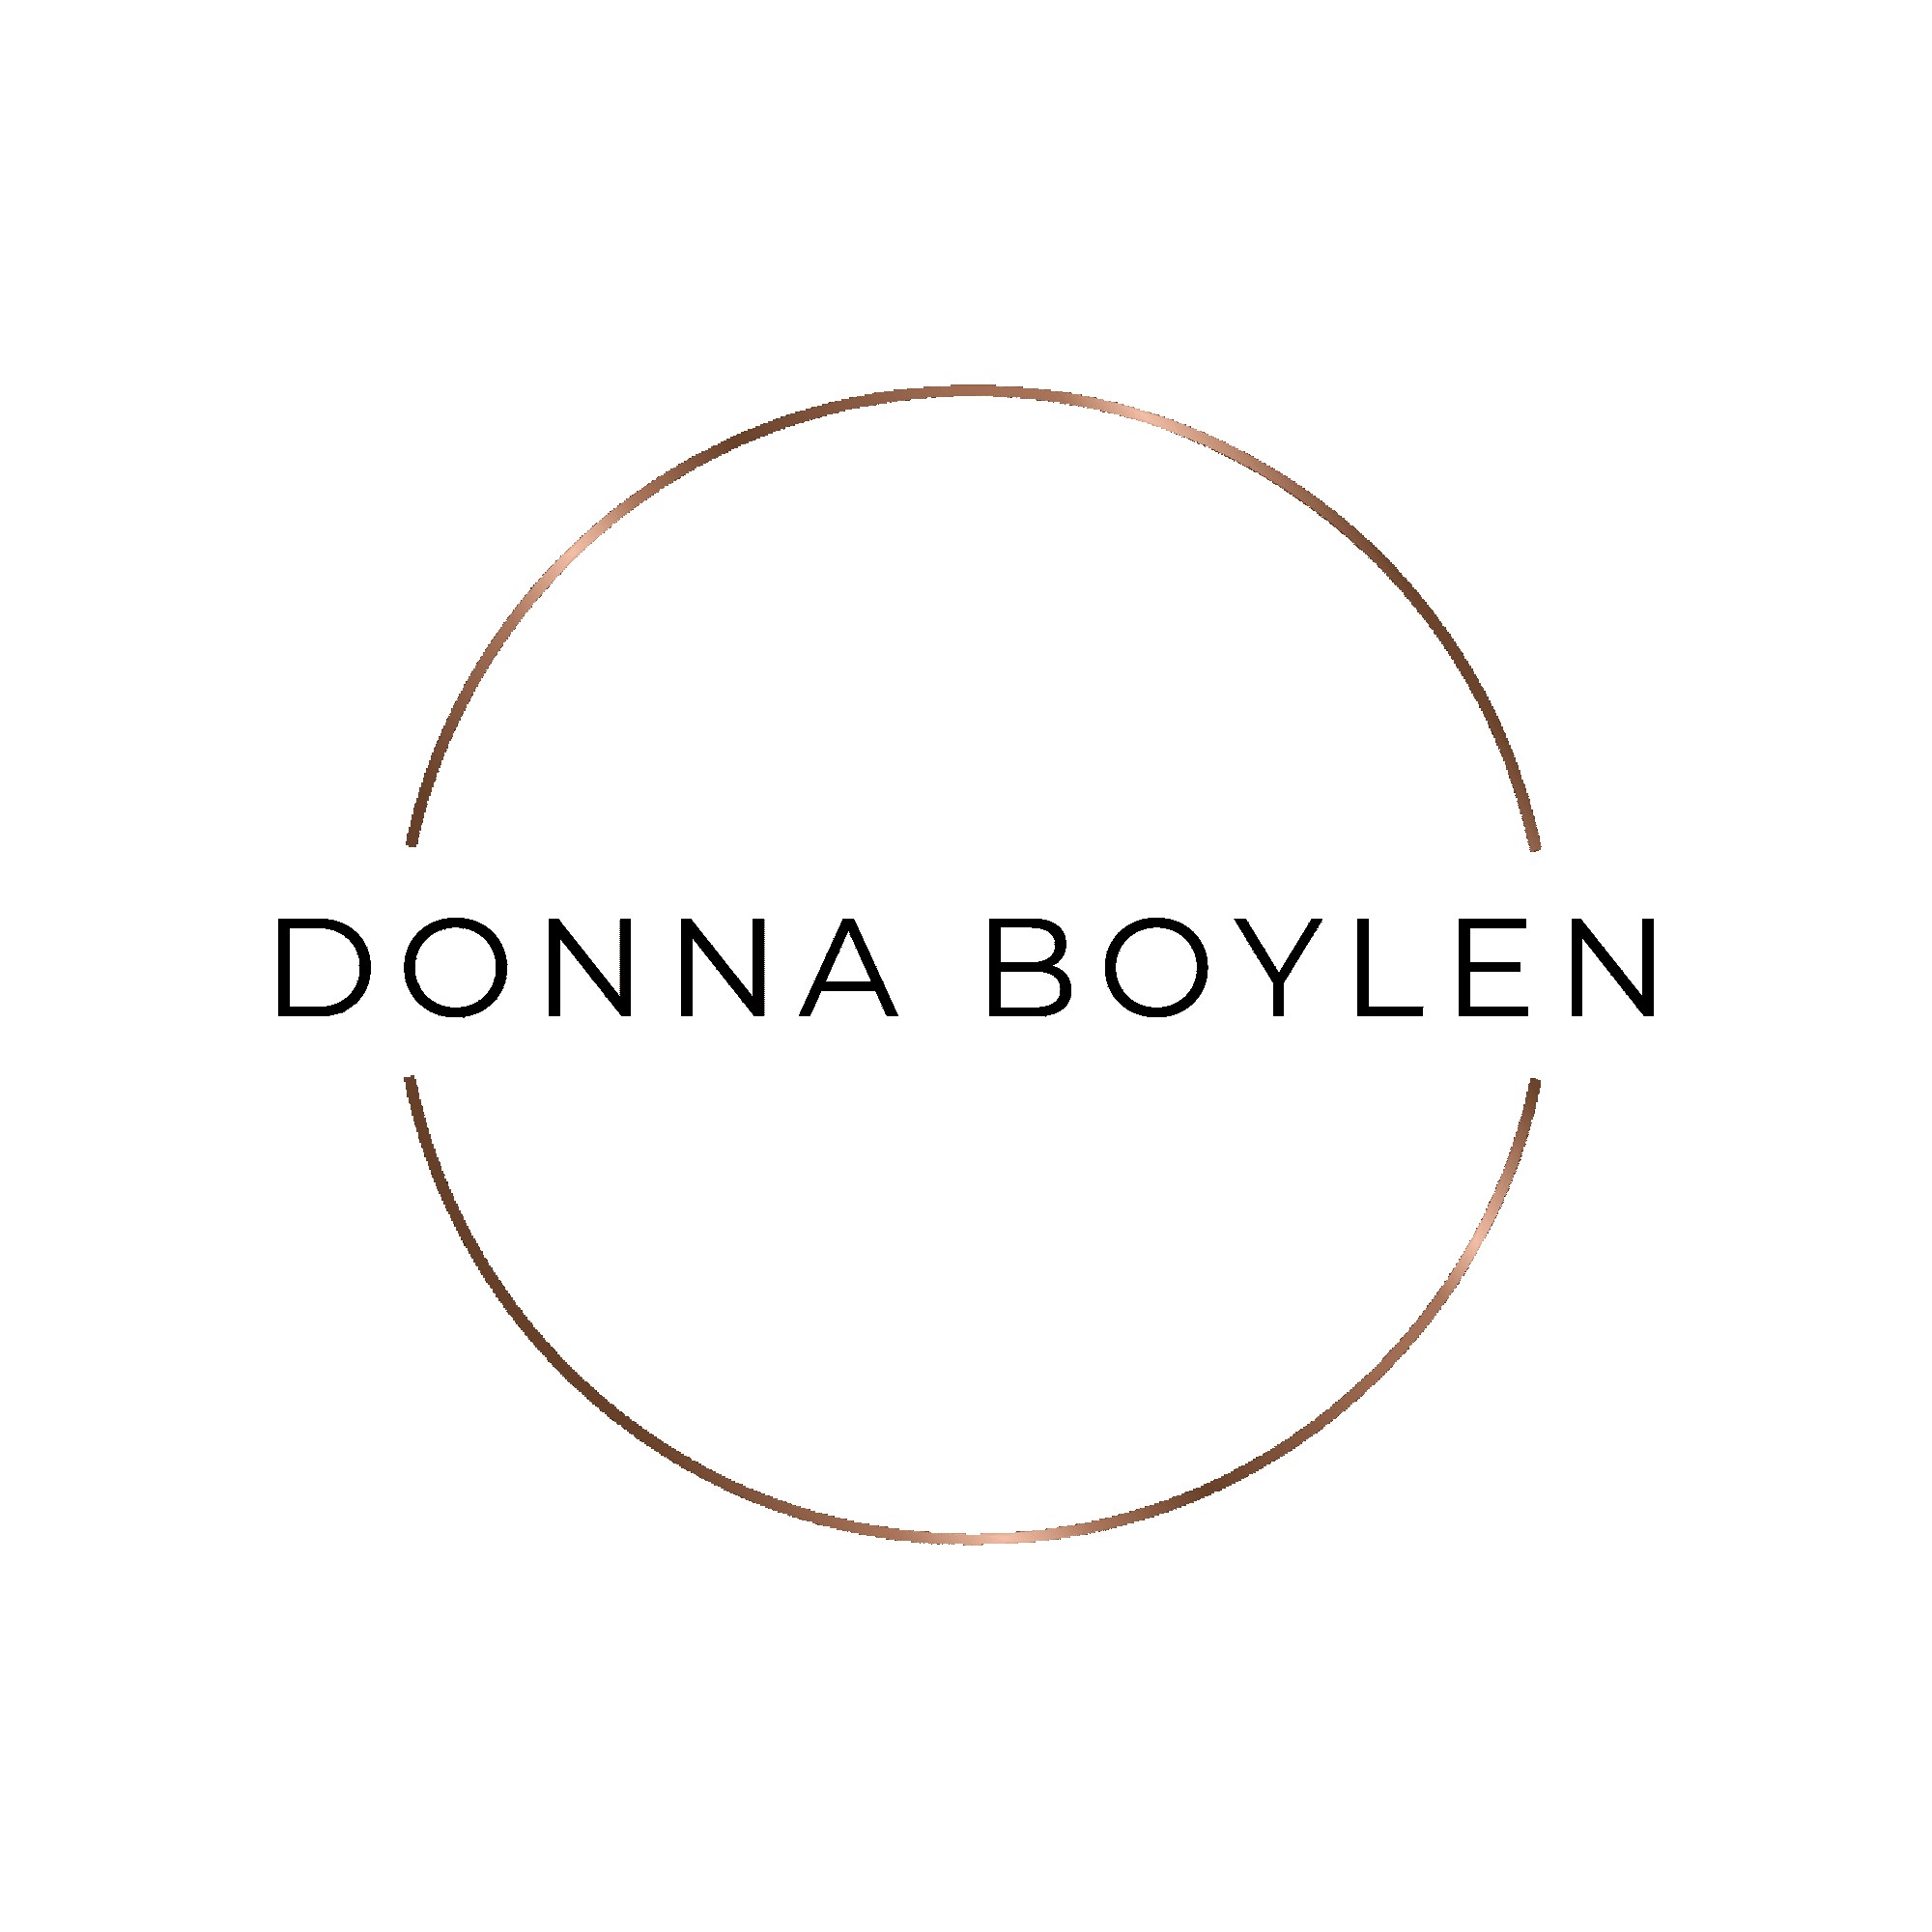 Donna Boylen therapist on Natural Therapy Pages